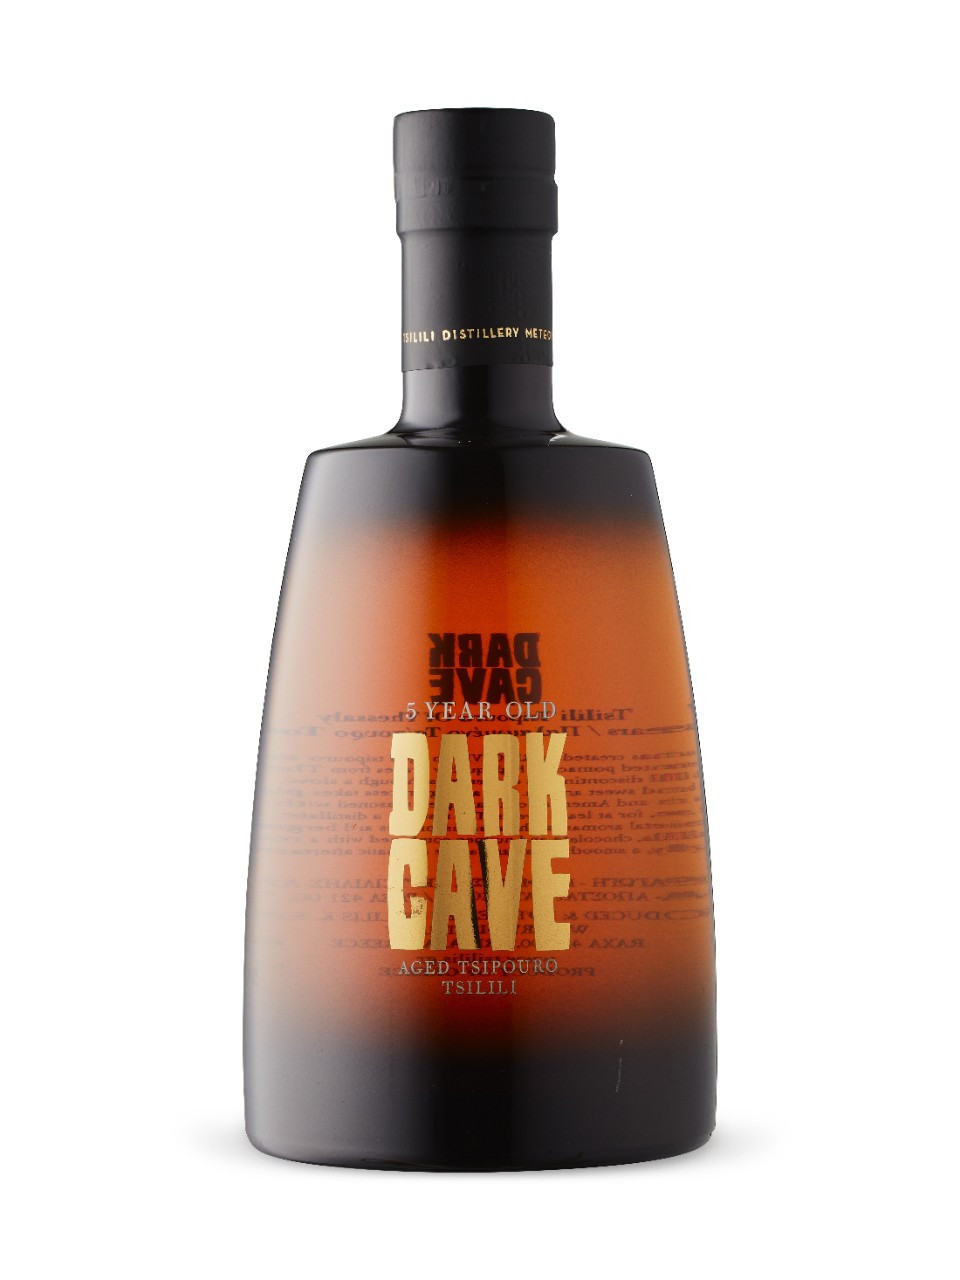 Dark cave aged tsipouro  (out of stock)